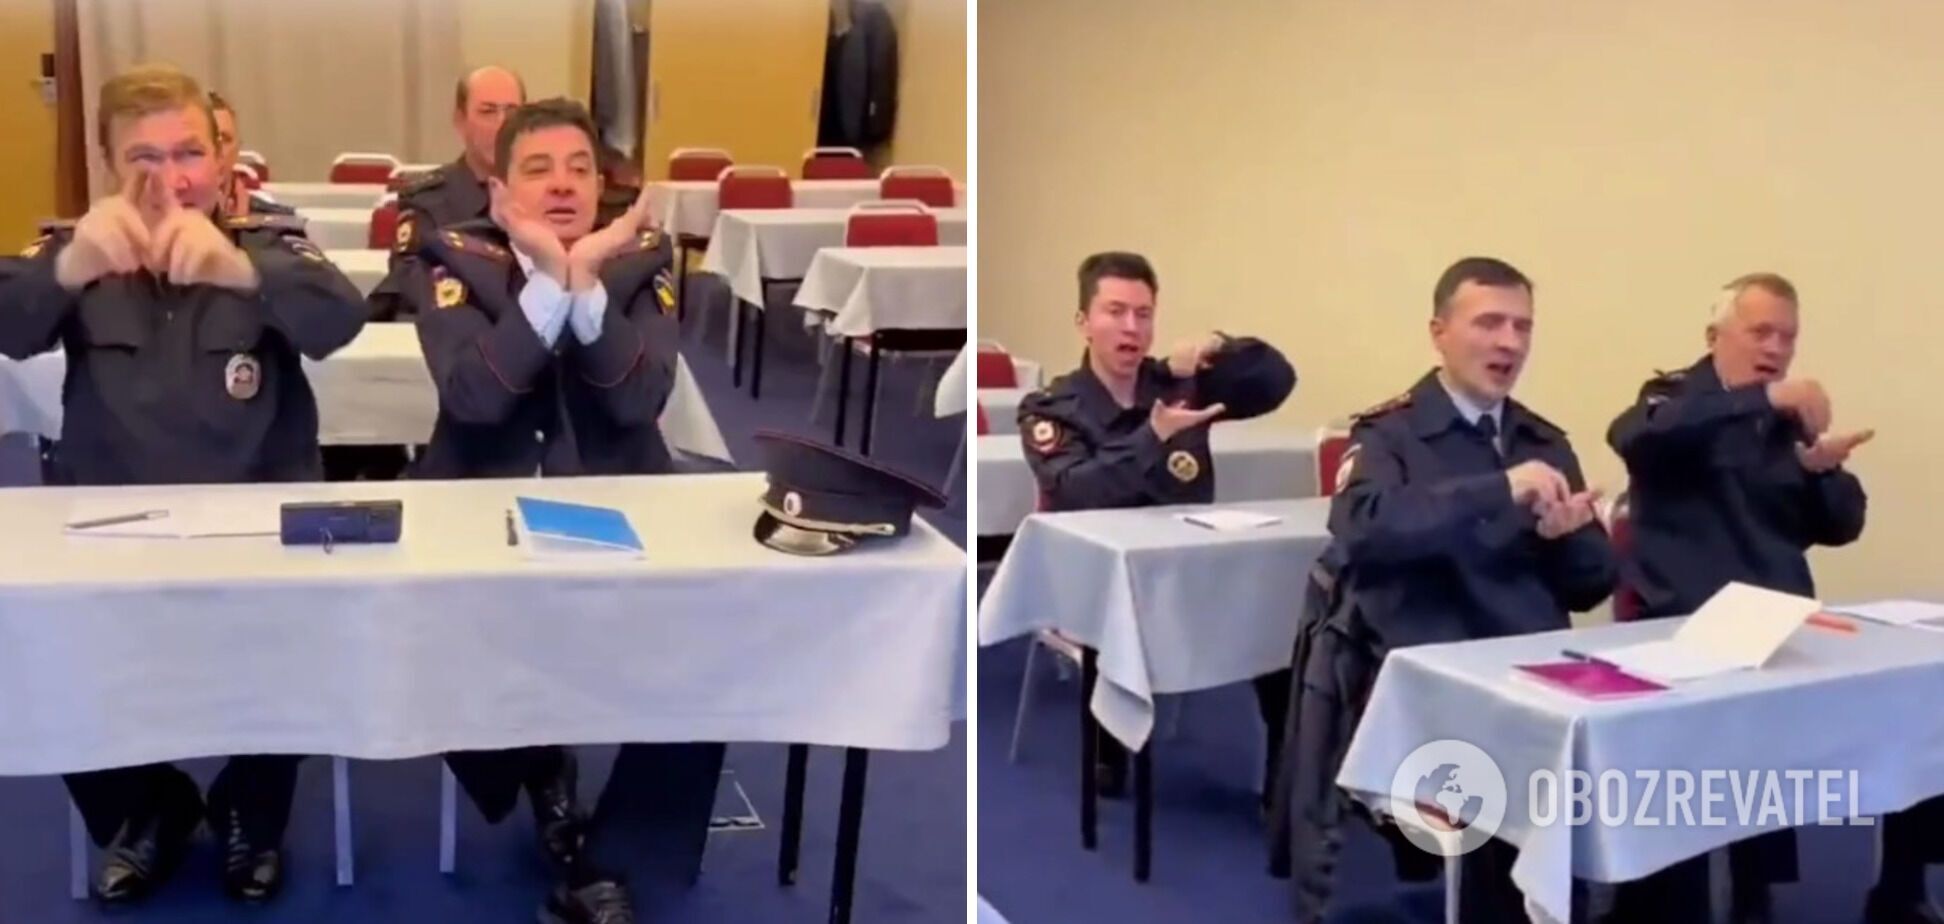 Are they preparing for something? A video of Russian police officers learning to sing in Chinese has been posted online